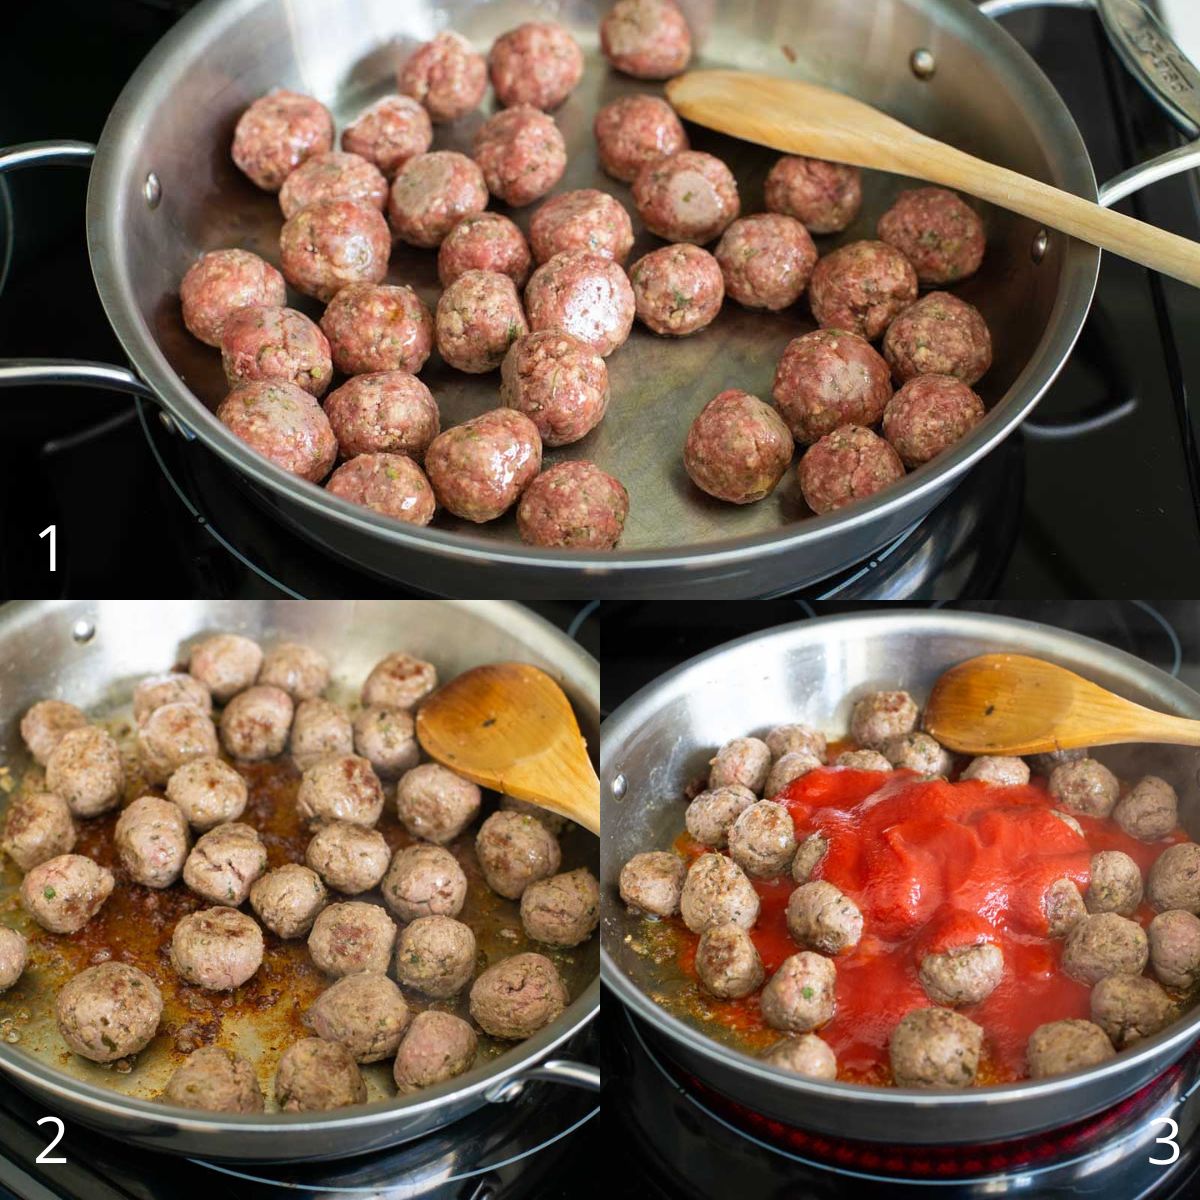 The meatballs have been added to the skillet and the photo collage shows how to brown them.